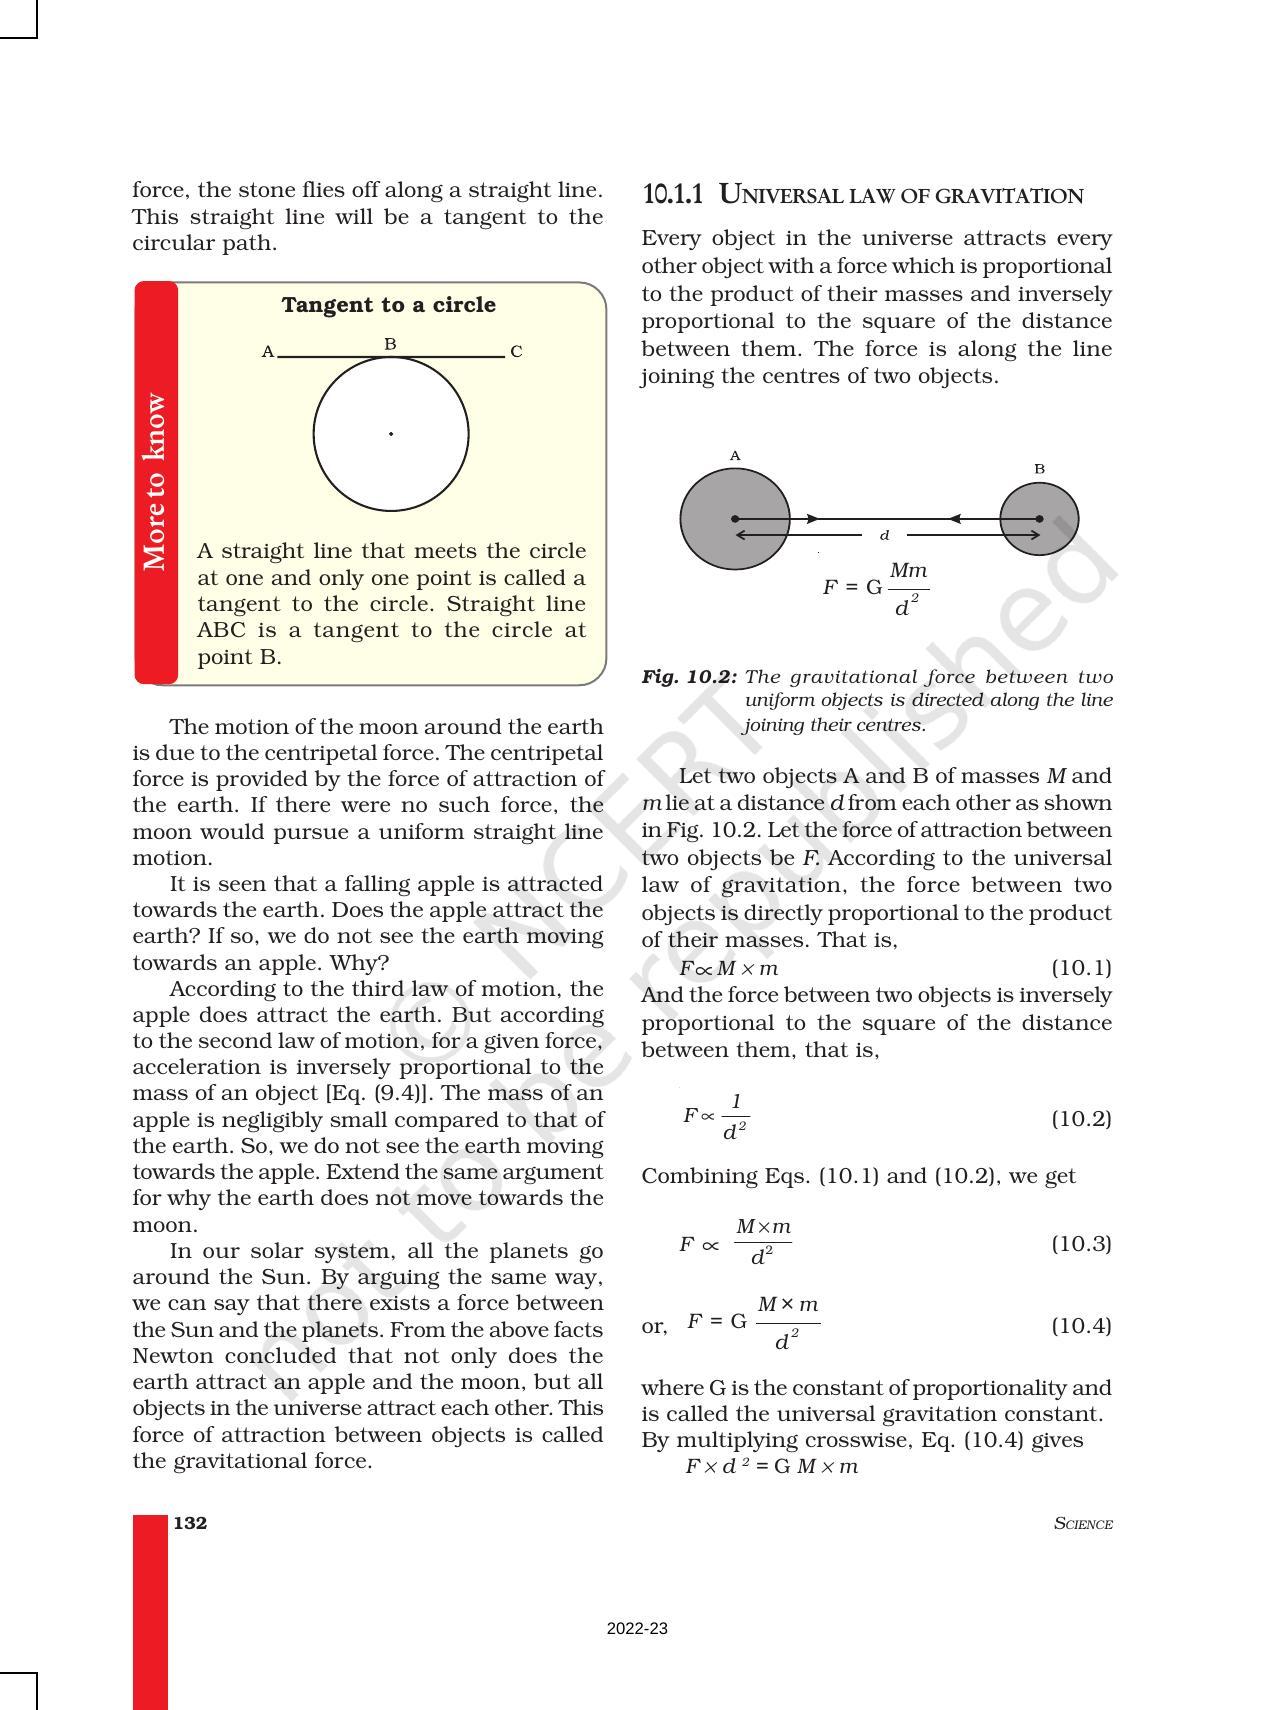 NCERT Book for Class 9 Science Chapter 10 Gravitation - Page 2